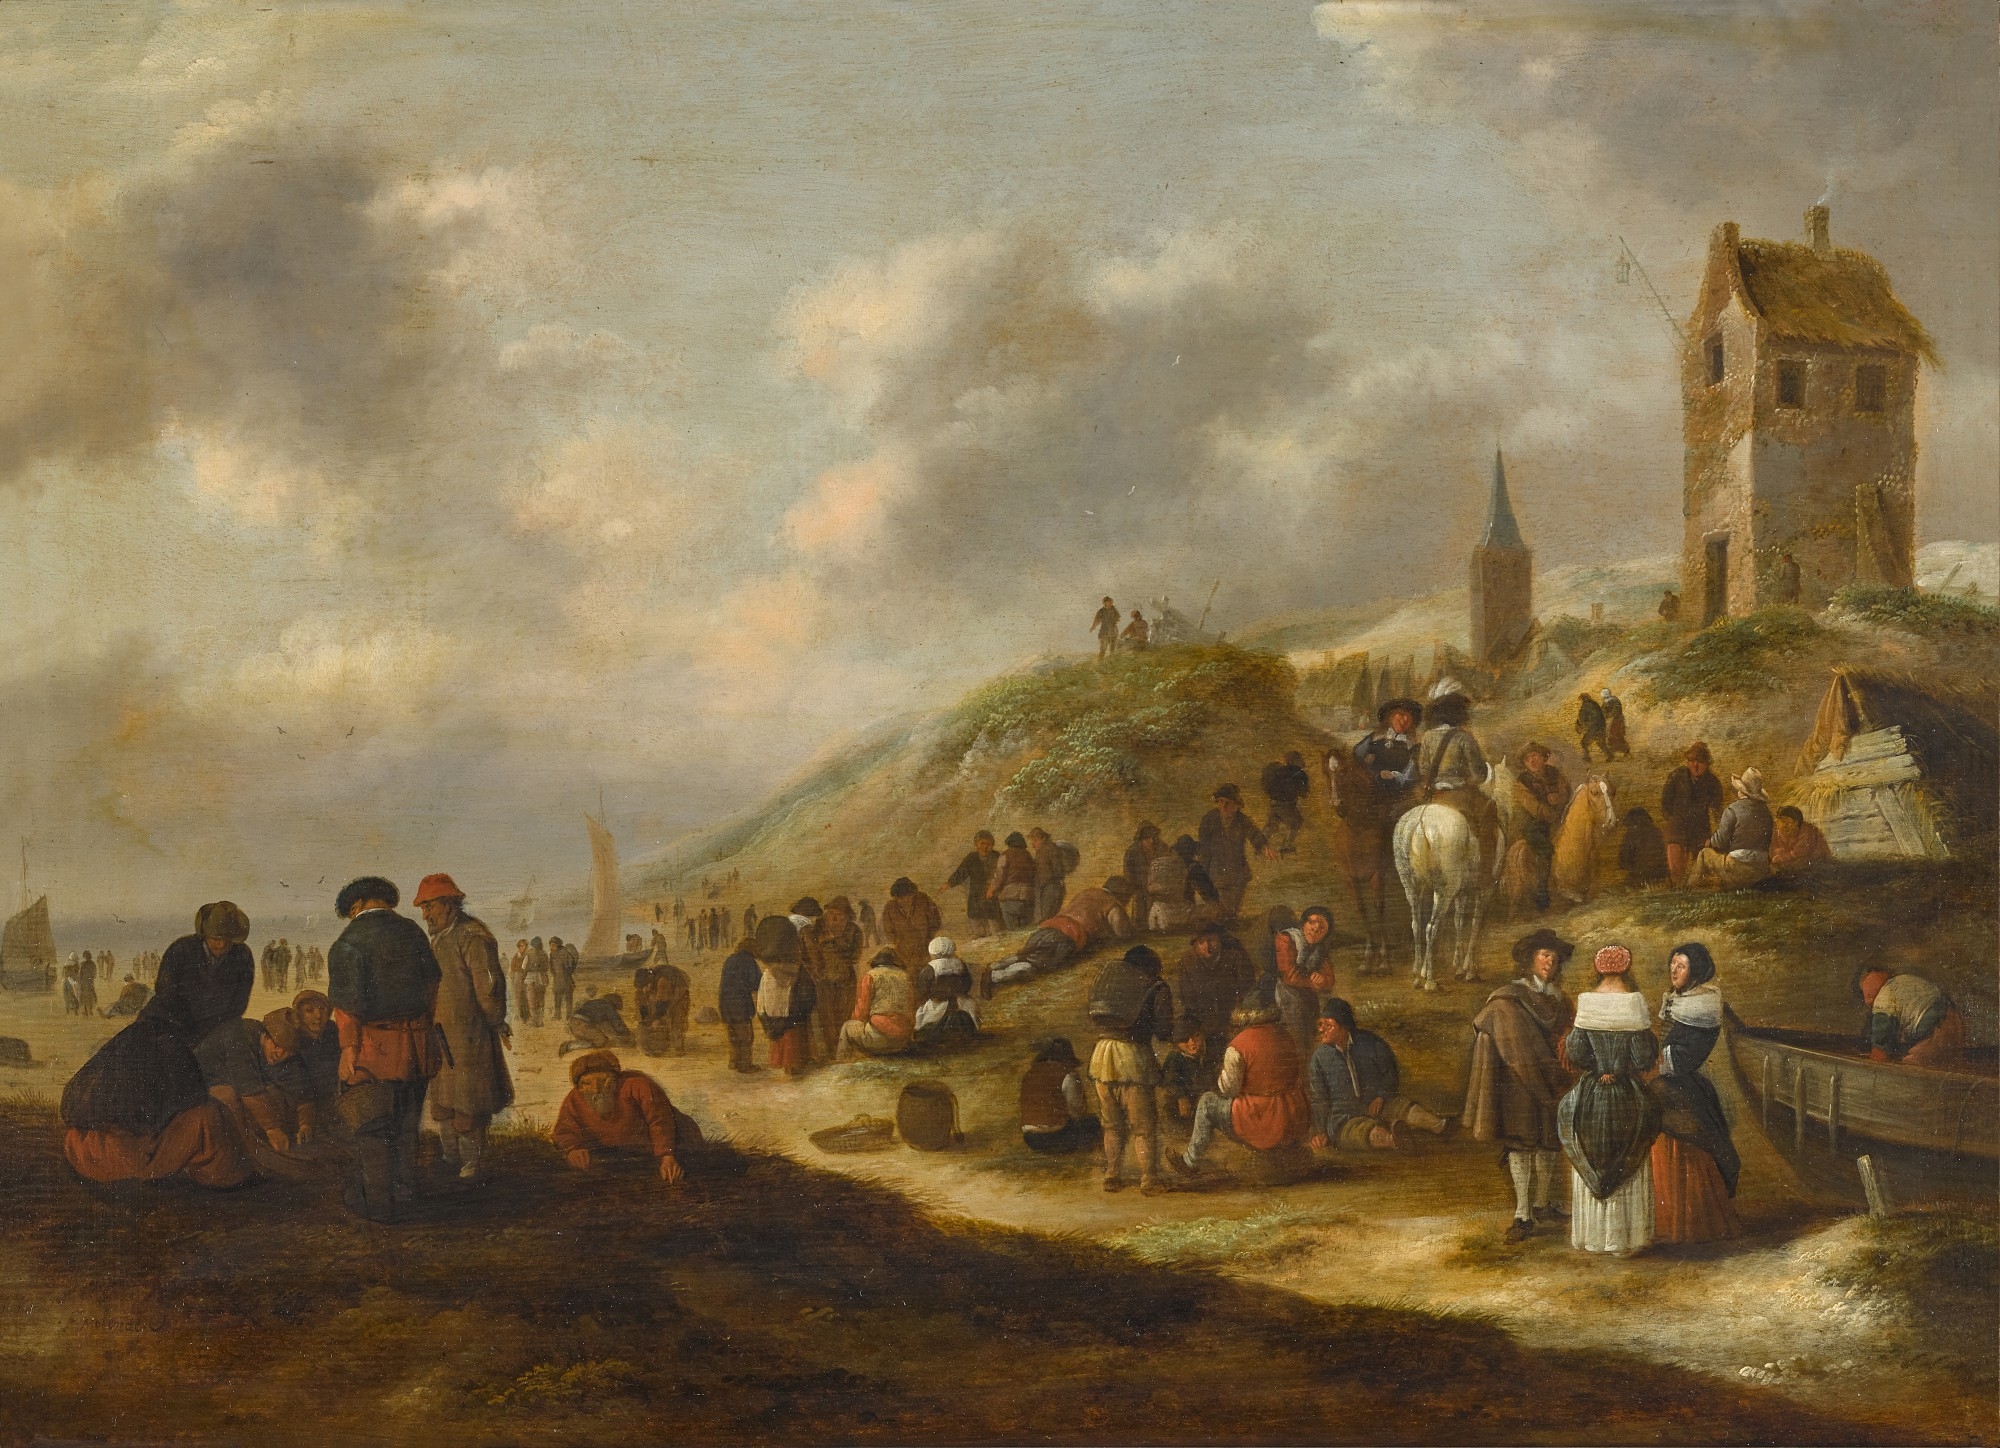 THE BEACH AT SCHEVENINGEN, WITH ELEGANTLY-DRESSED FIGURES, AND FISHERMEN SELLING THEIR CATCH by Klaes Molenaer, 1676